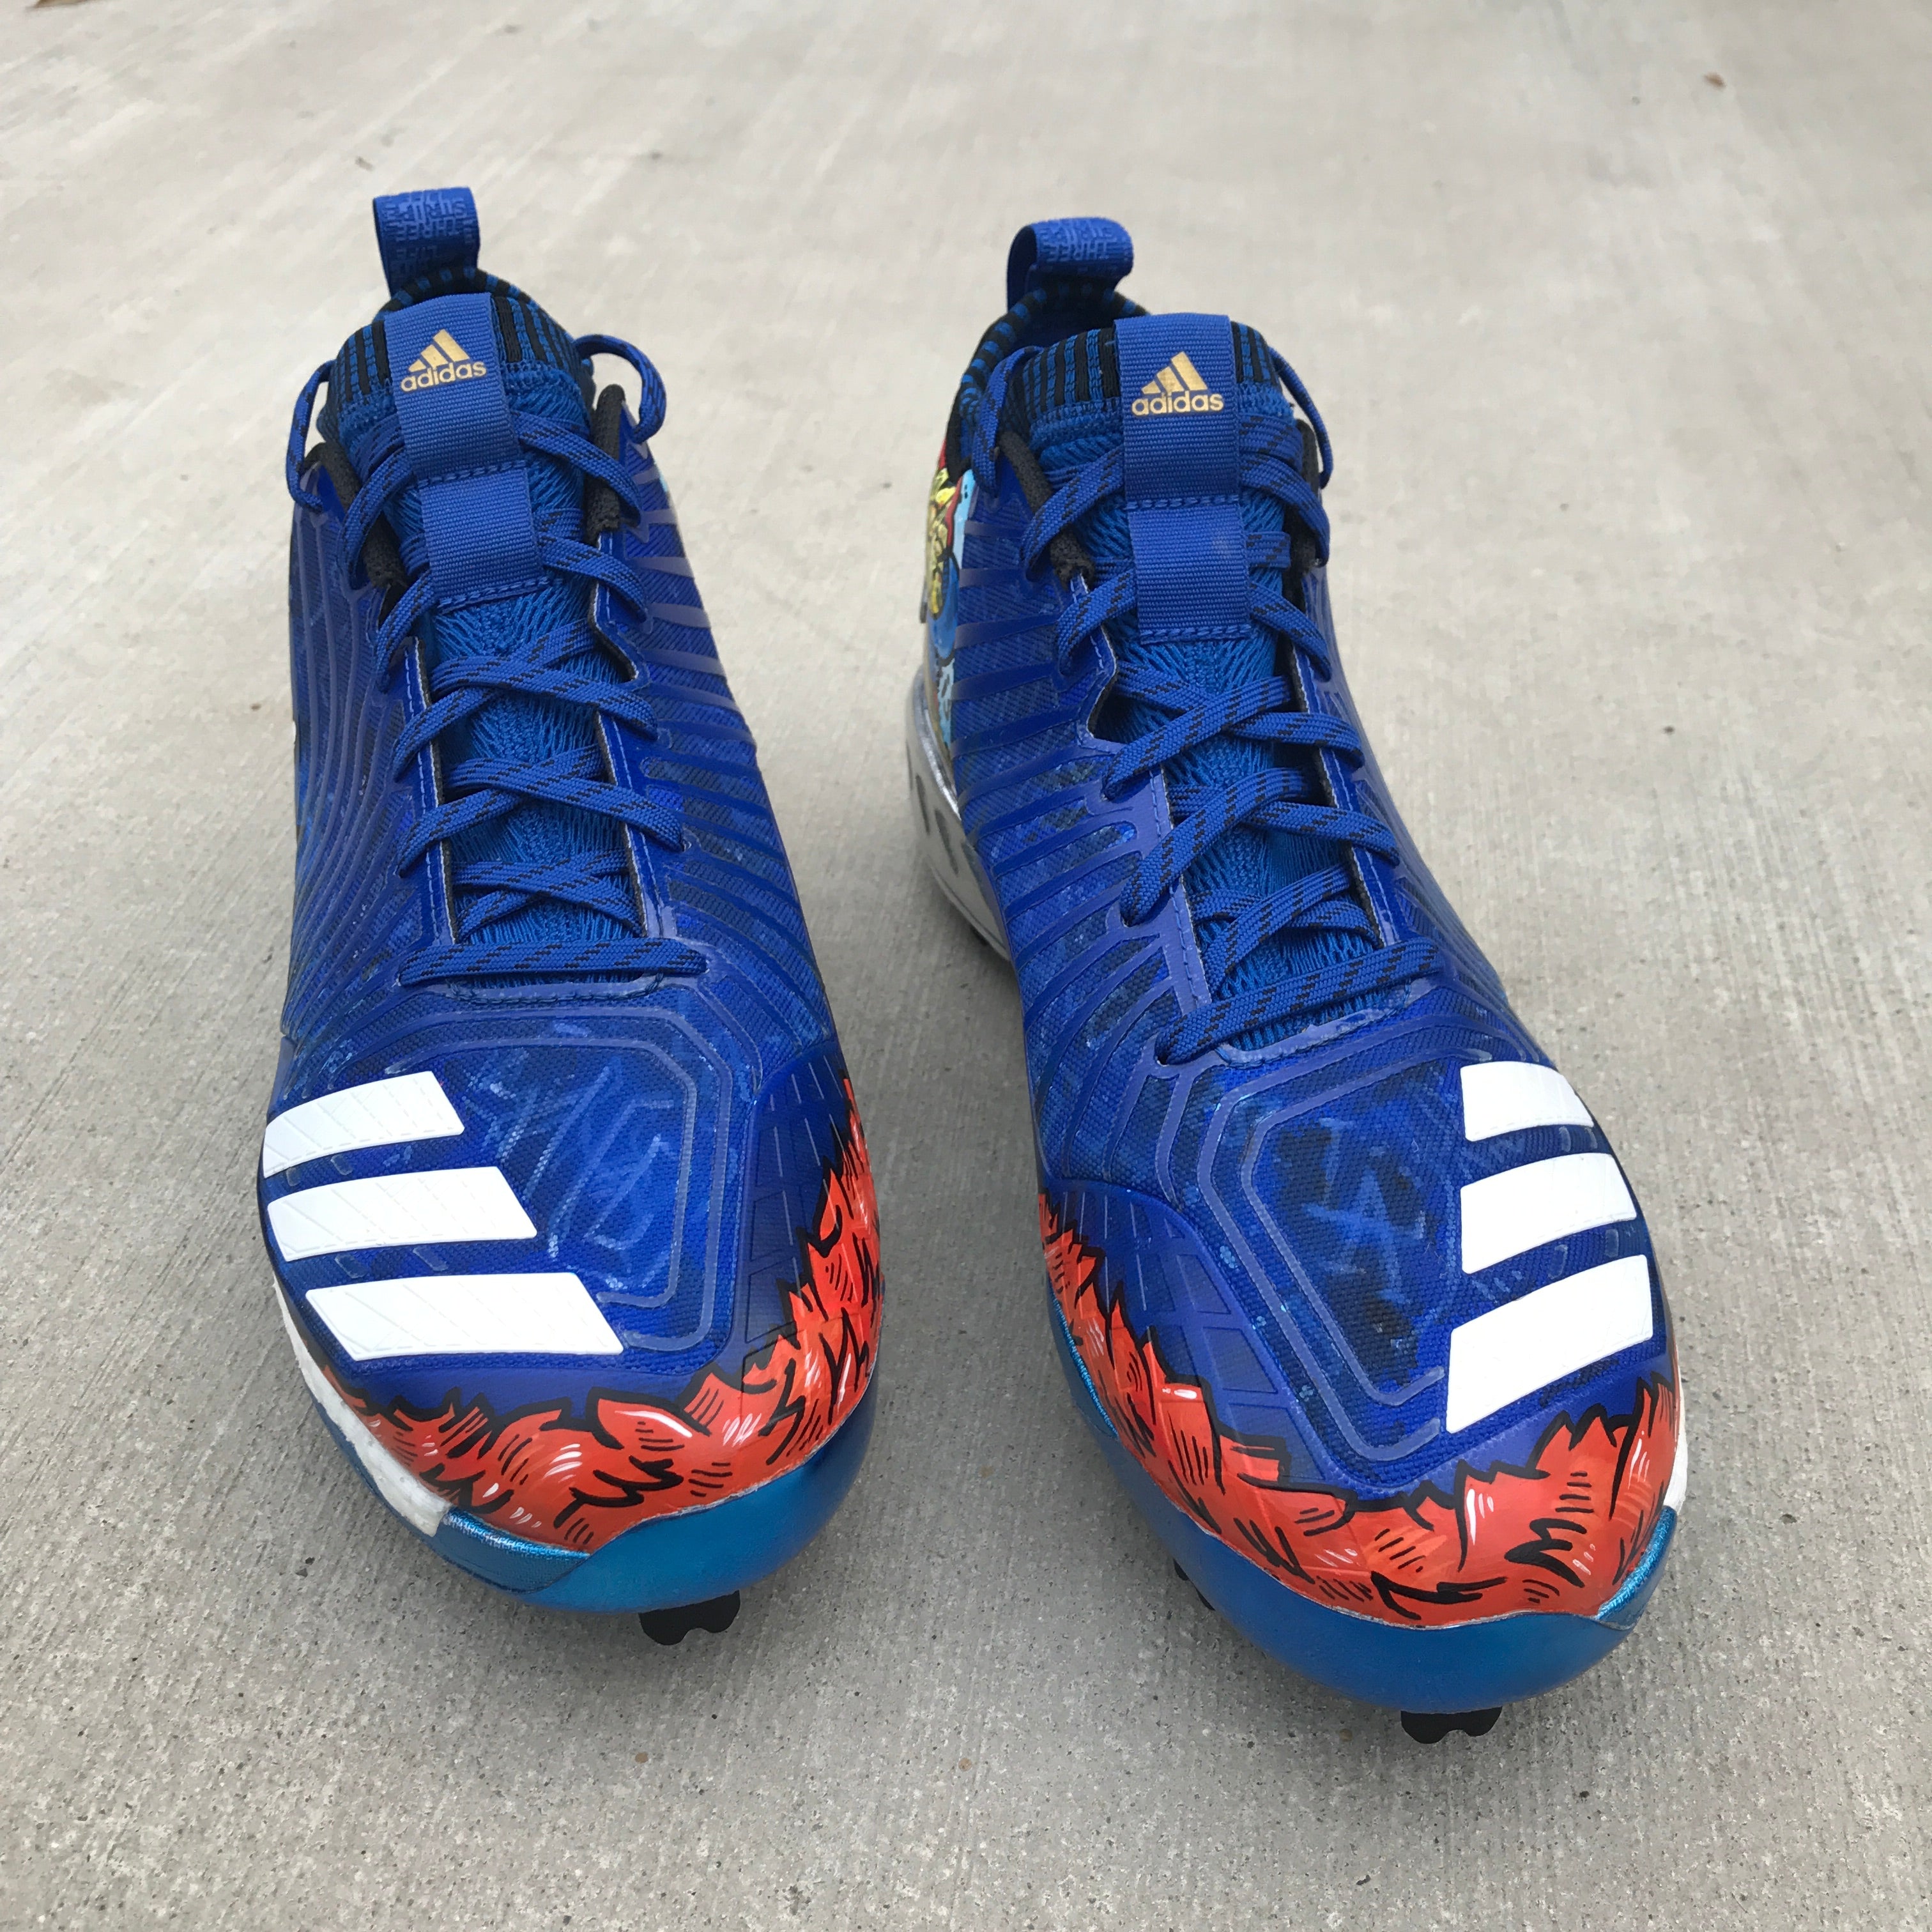 Dodgers News: Justin Turner Wears Custom Cleats To Honor Lakers